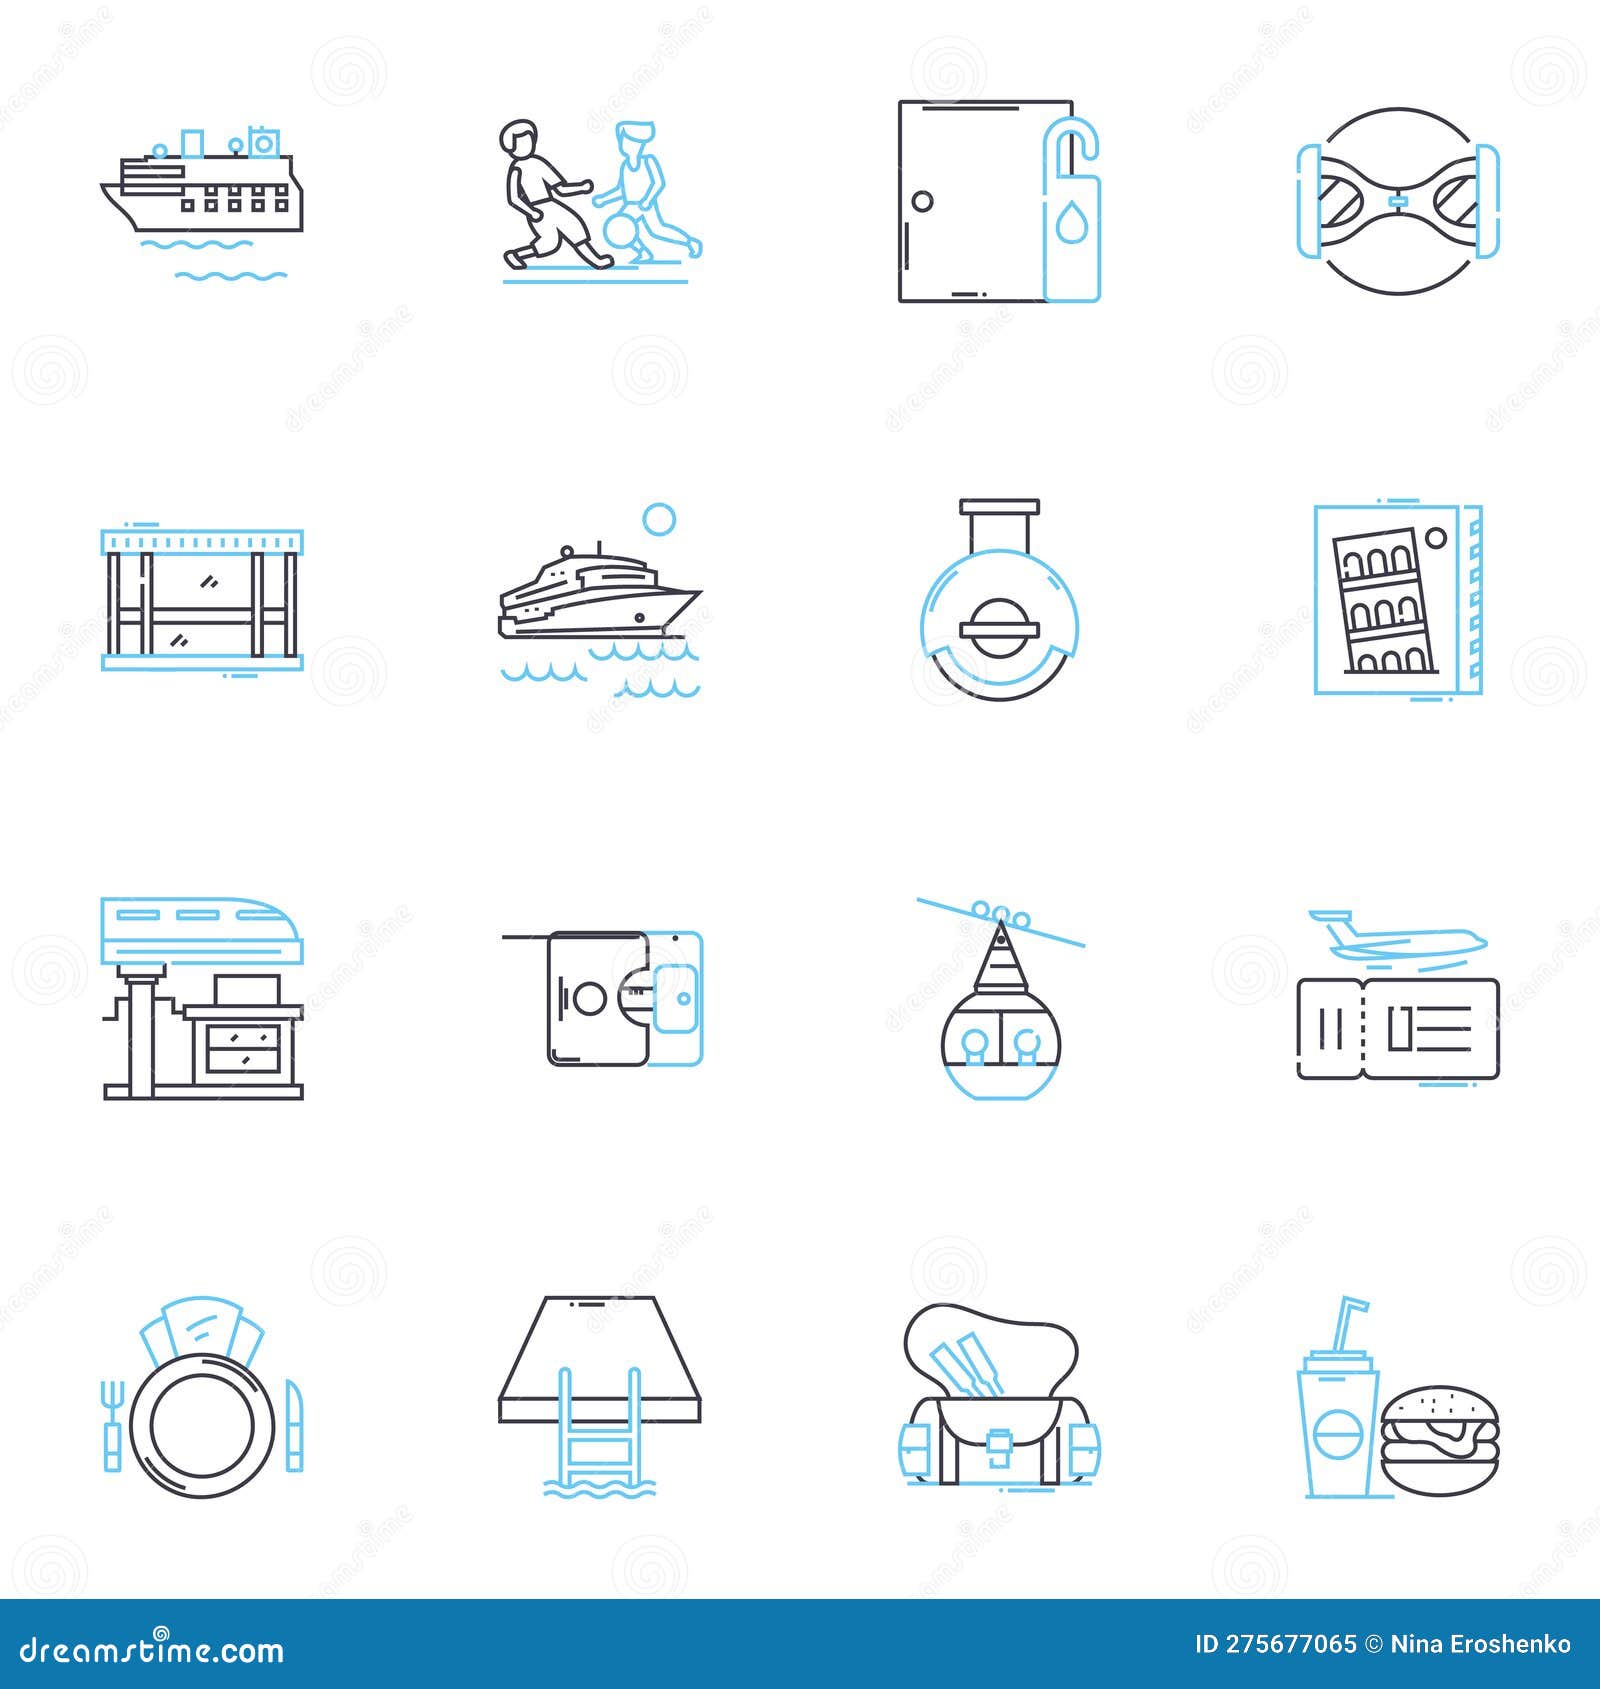 enjoyable jaunt linear icons set. adventure, escapade, expedition, fun, leisure, excursion, outing line  and